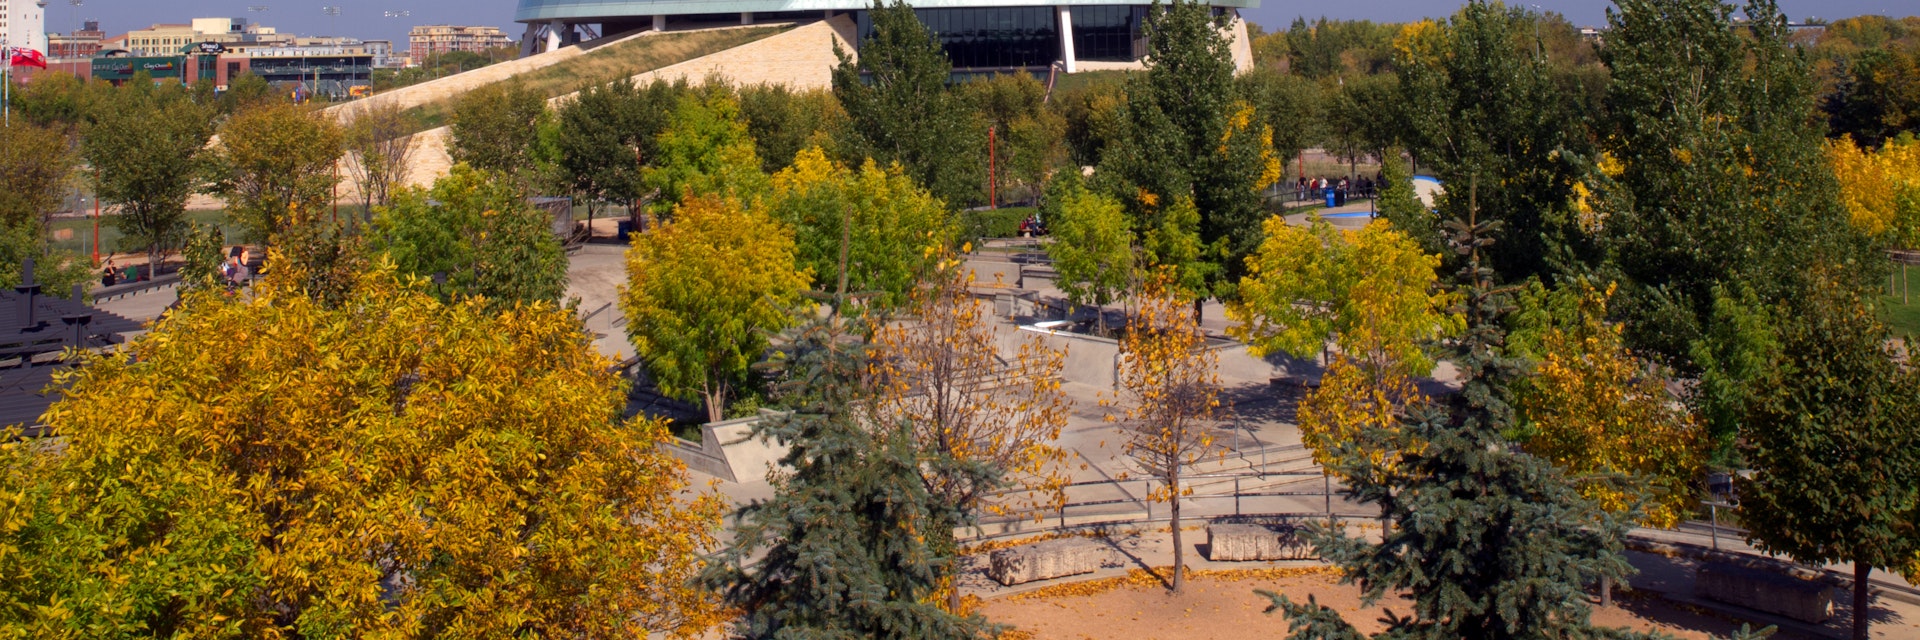 This is an image of The Canadian Museum For Human Rights. The Museum is located at The Forks in Winnipeg, Manitoba, Canada and is now open to the public.